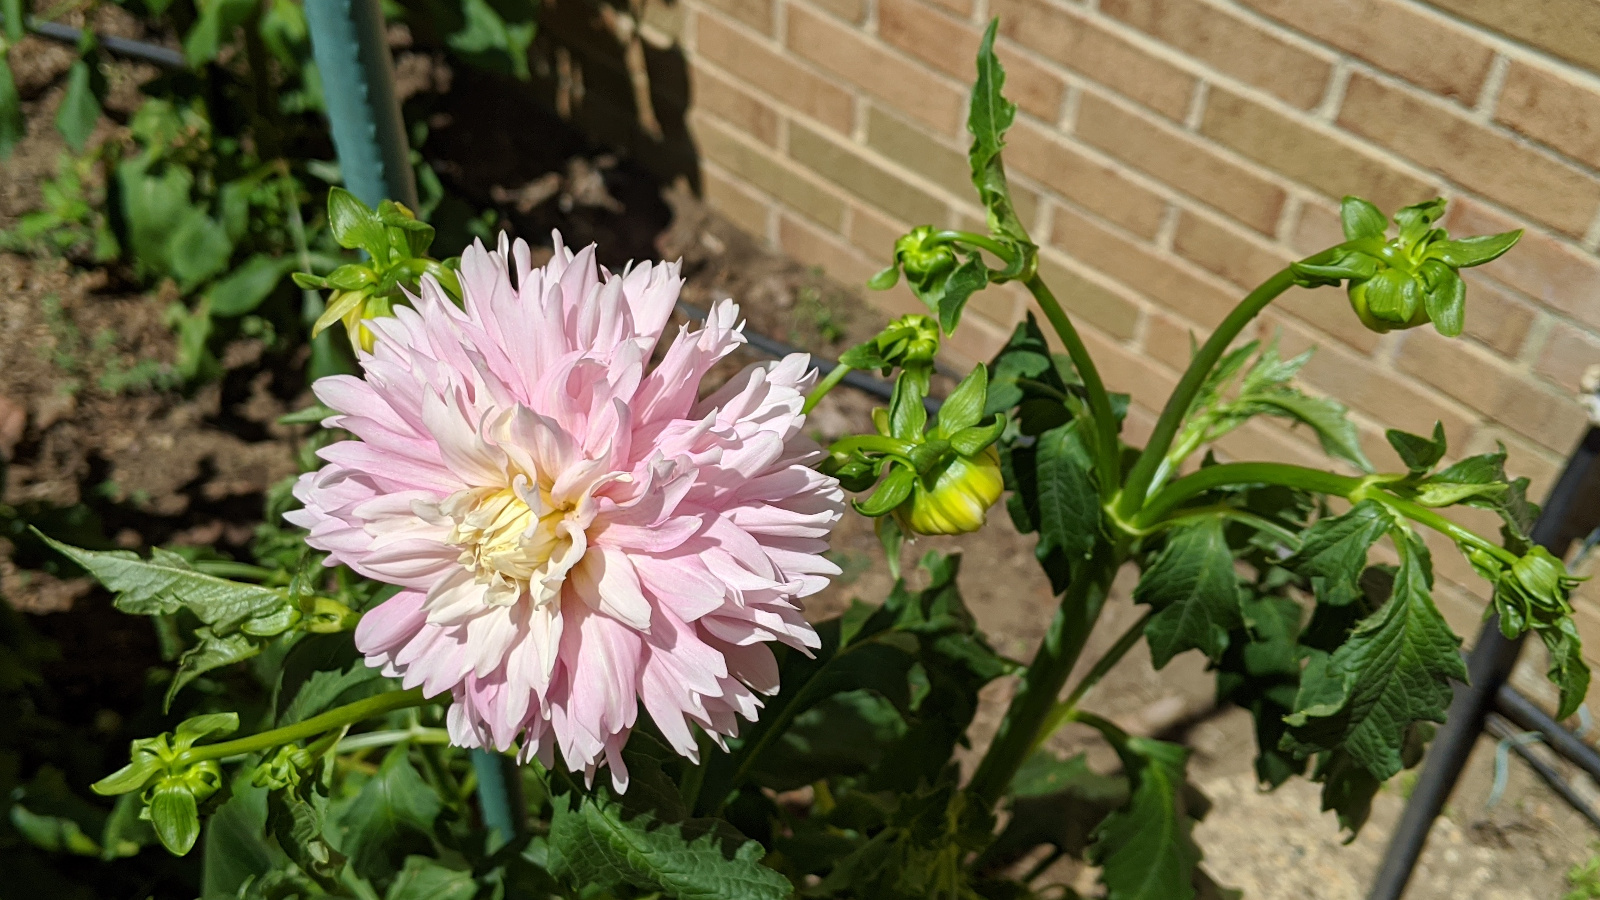 Chilson's Pride blooming